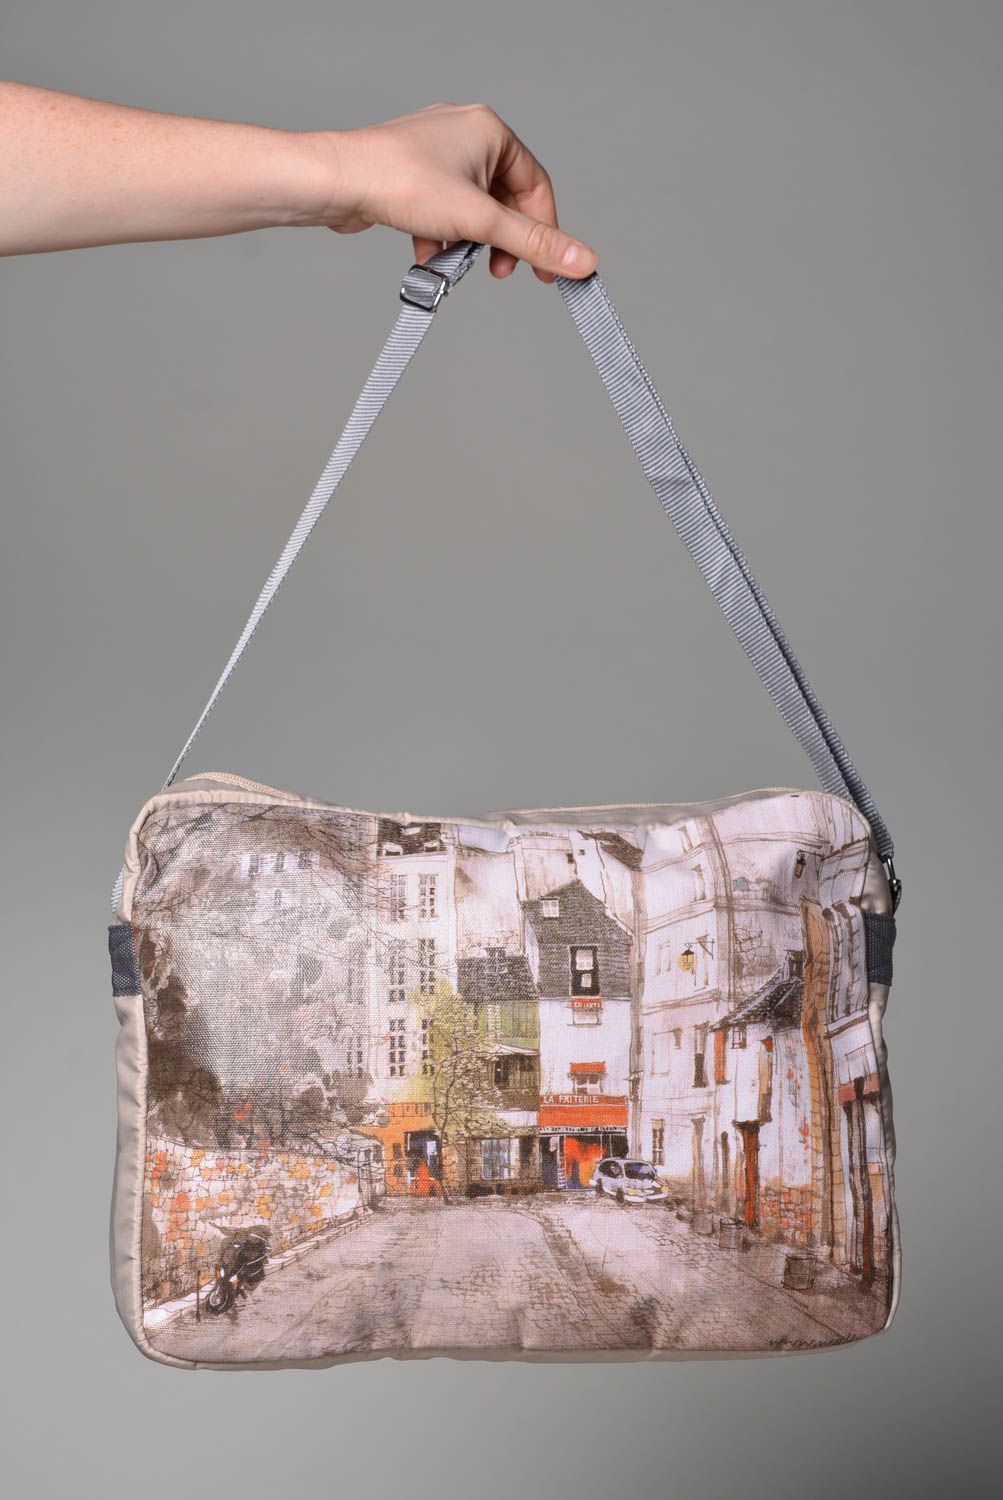 Handmade fabric bag shoulder bag fashion accessories best gifts for her photo 3